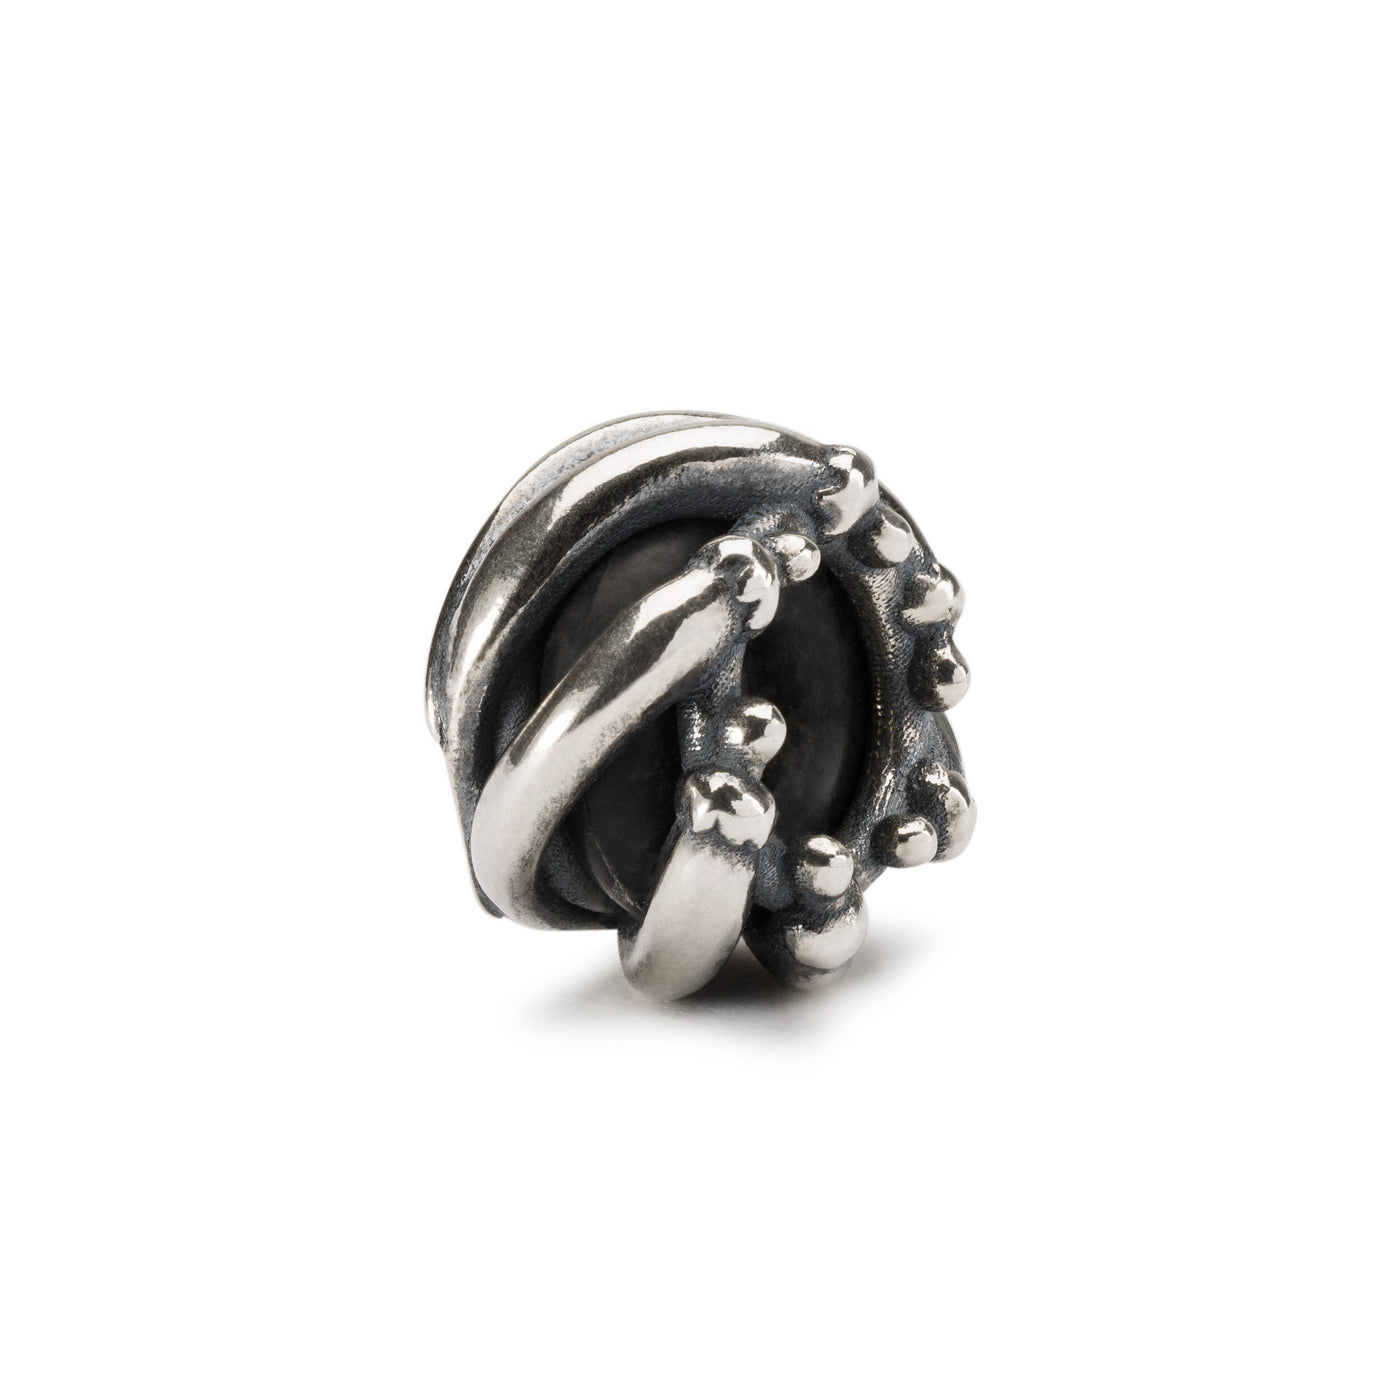 Chili Spacer - Trollbeads Canada